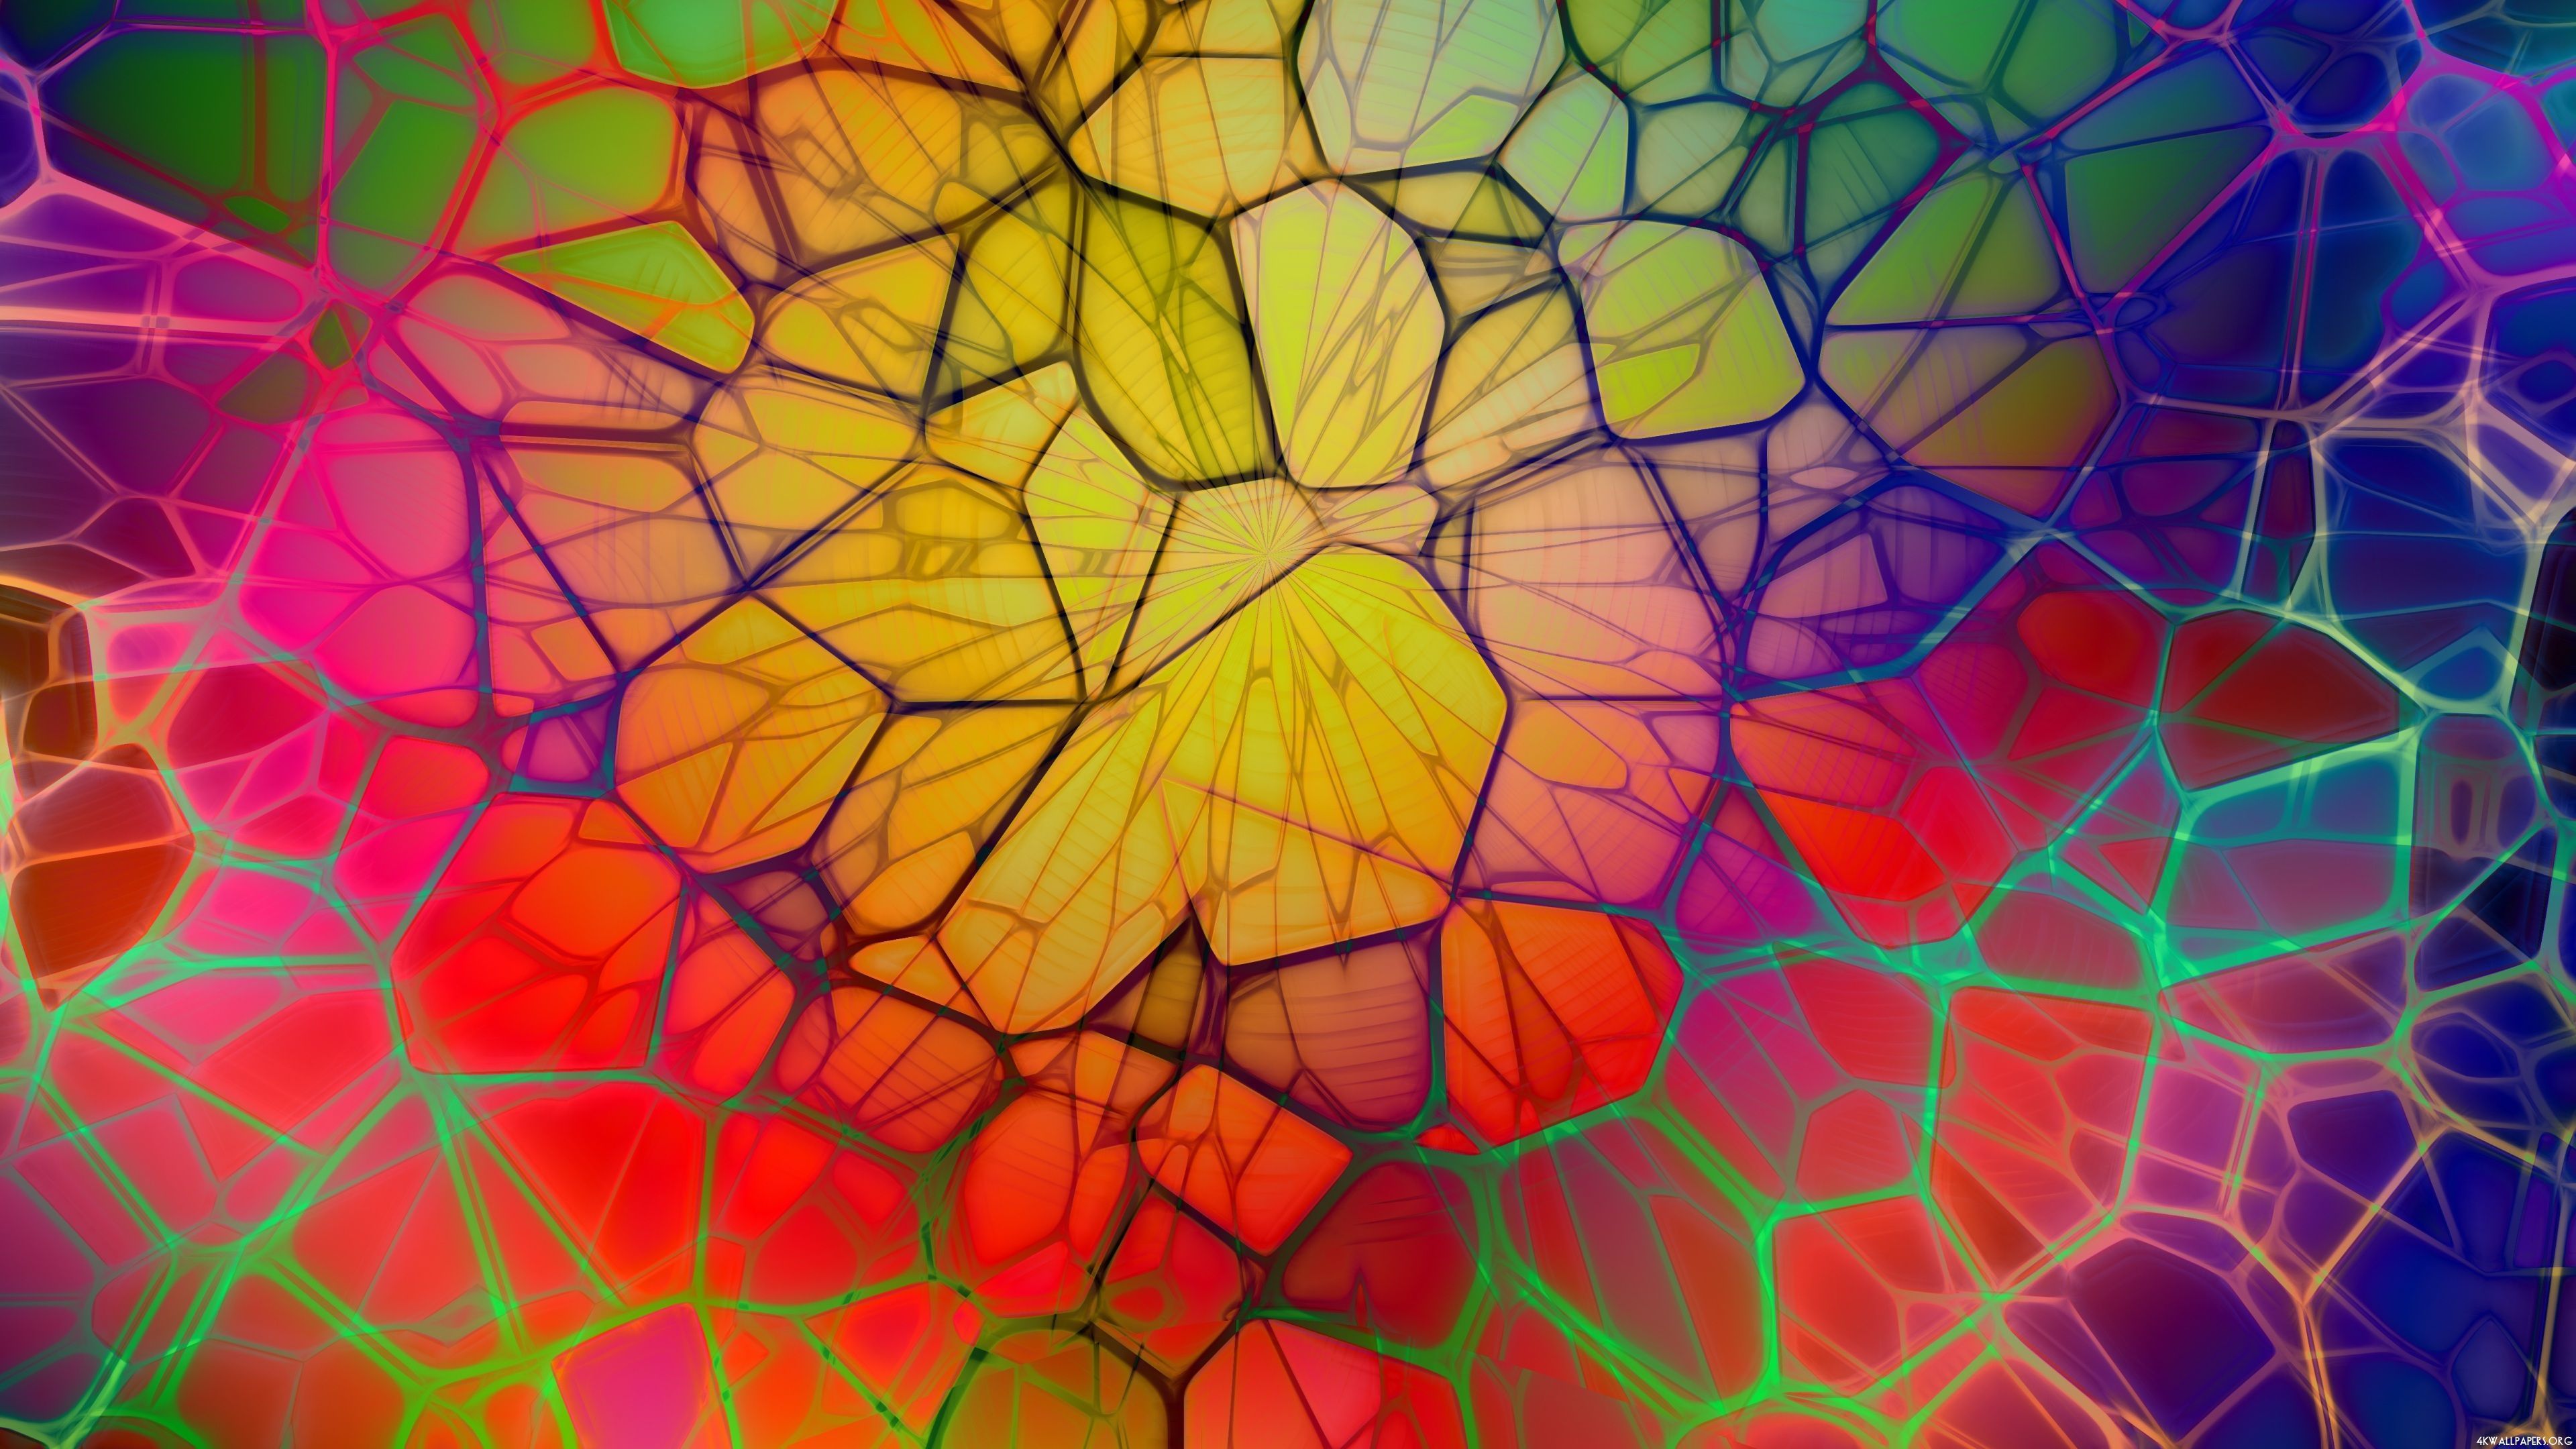 Abstract Colorful Web 4K Ultra HD Wallpaper 3840x2160 | ID: 302